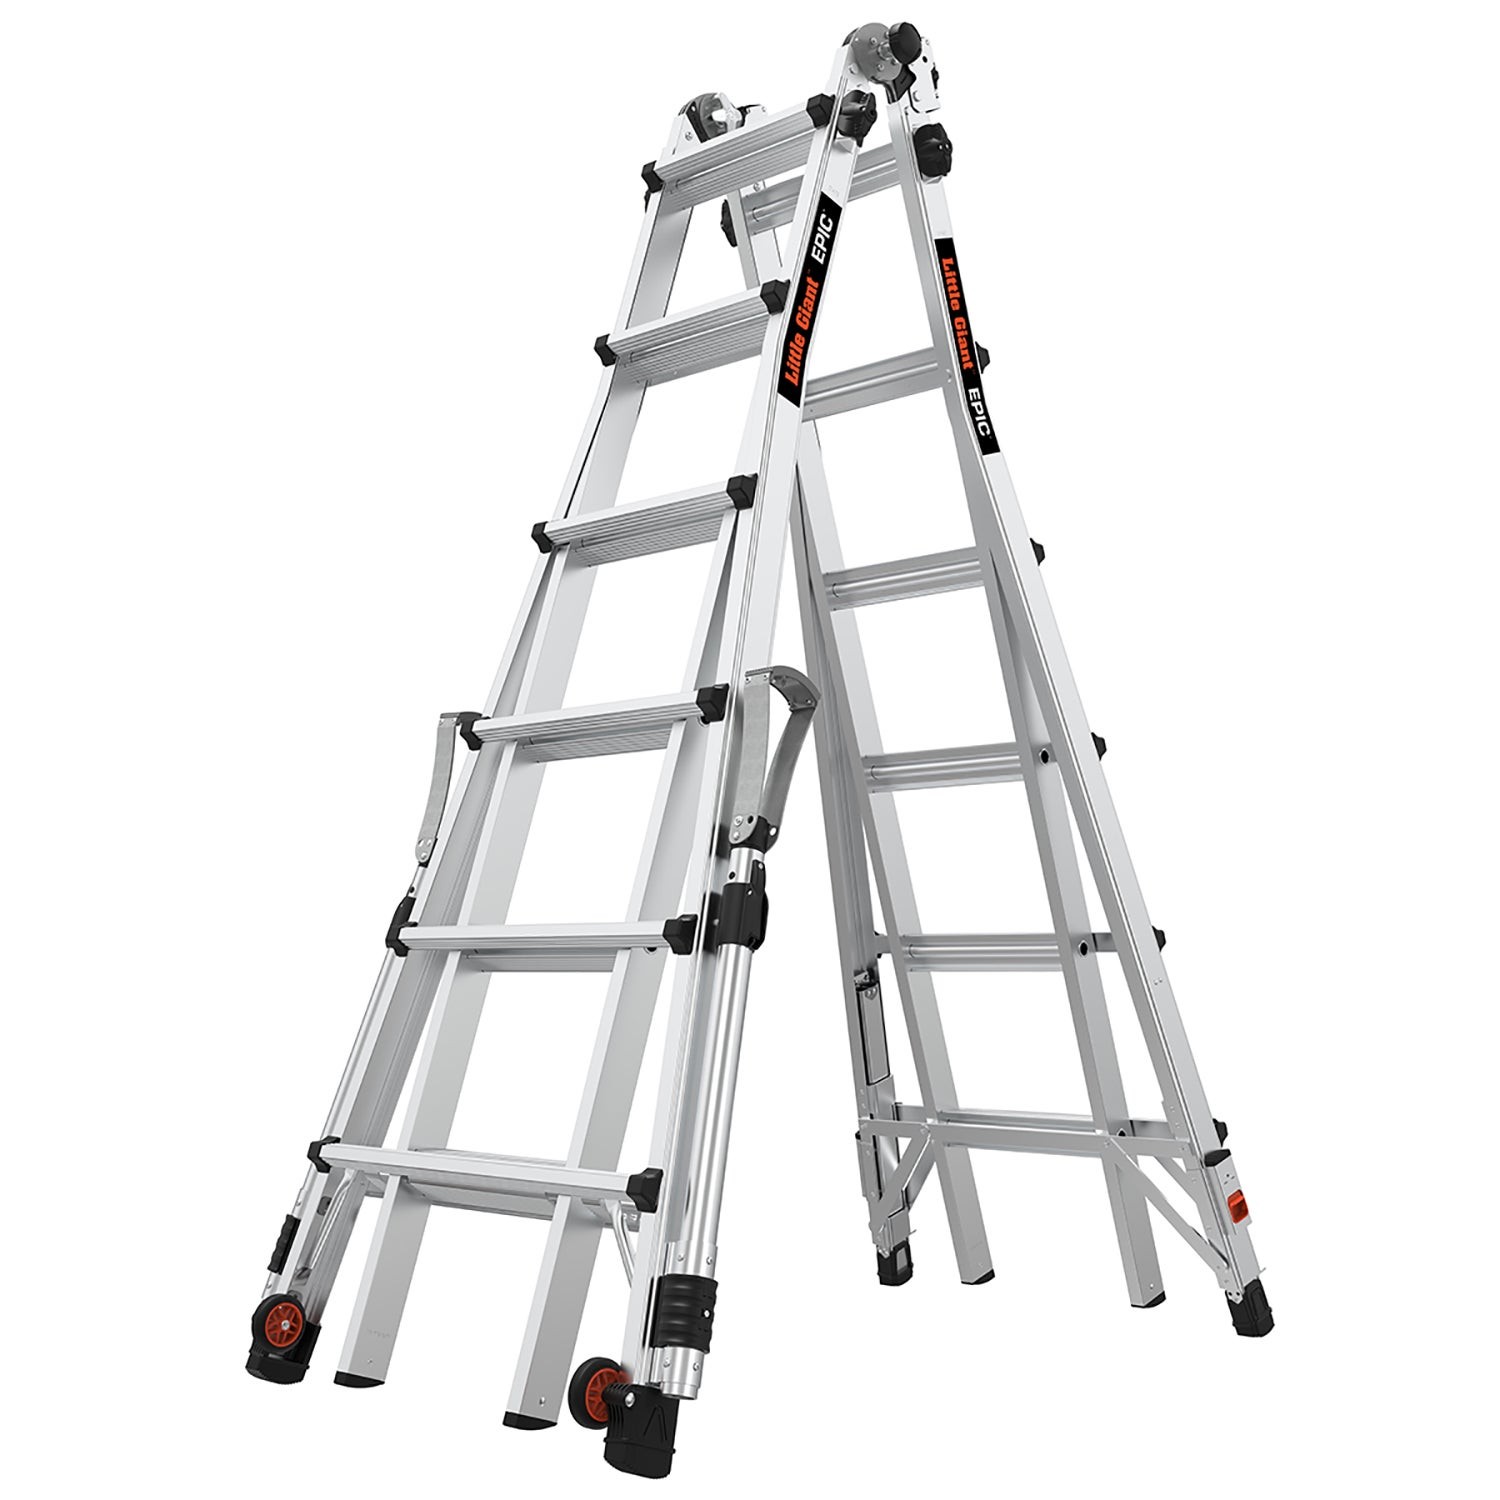 Epic Model 26 Aluminum Articulated Extendable Type IA Ladder w/ Epic Bundle